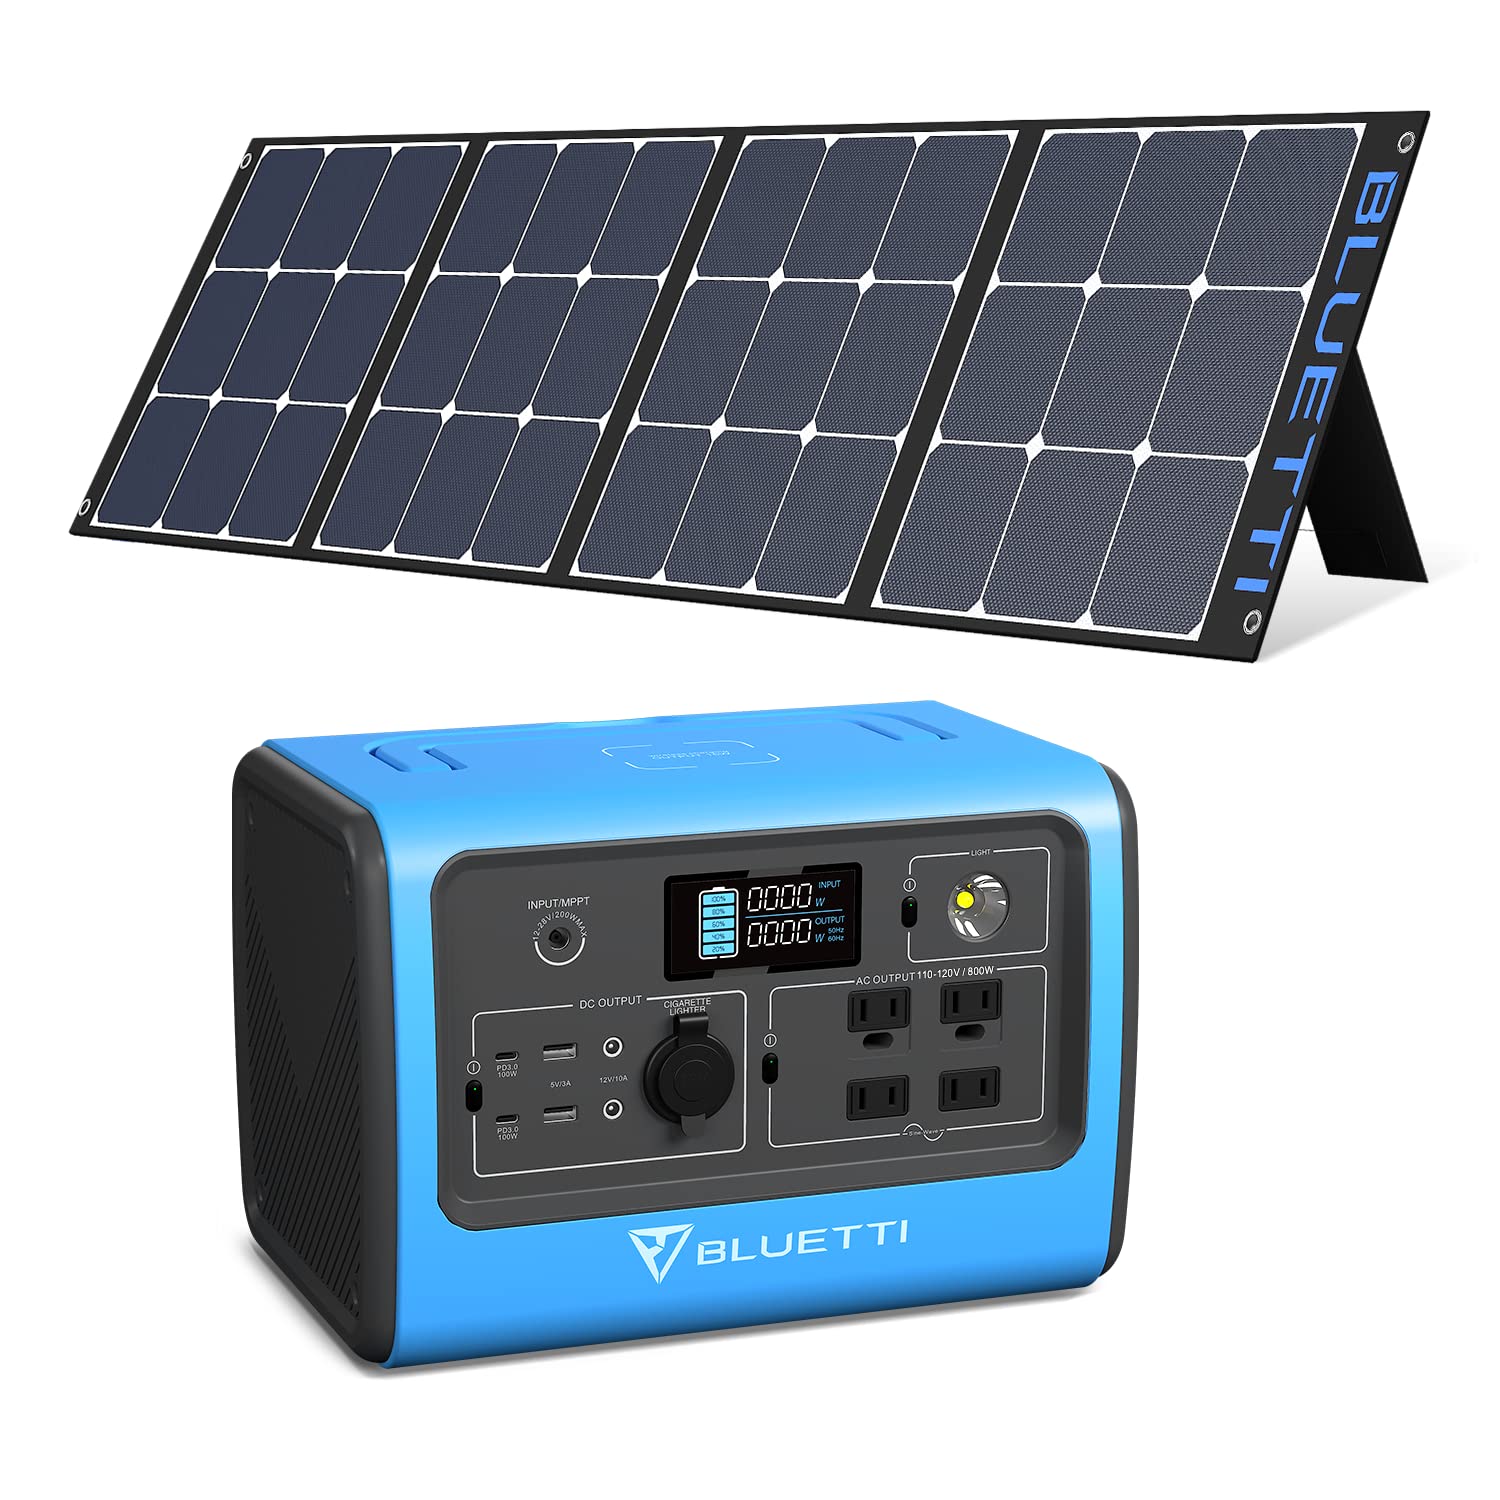 BLUETTI Solar Generator EB70S with SP120 120W Solar Panel Included, 716Wh Portable Power Station w/ 4 800W AC Outlets, LiFePO4 Battery Backup for Camping, Outdoor, Emergency